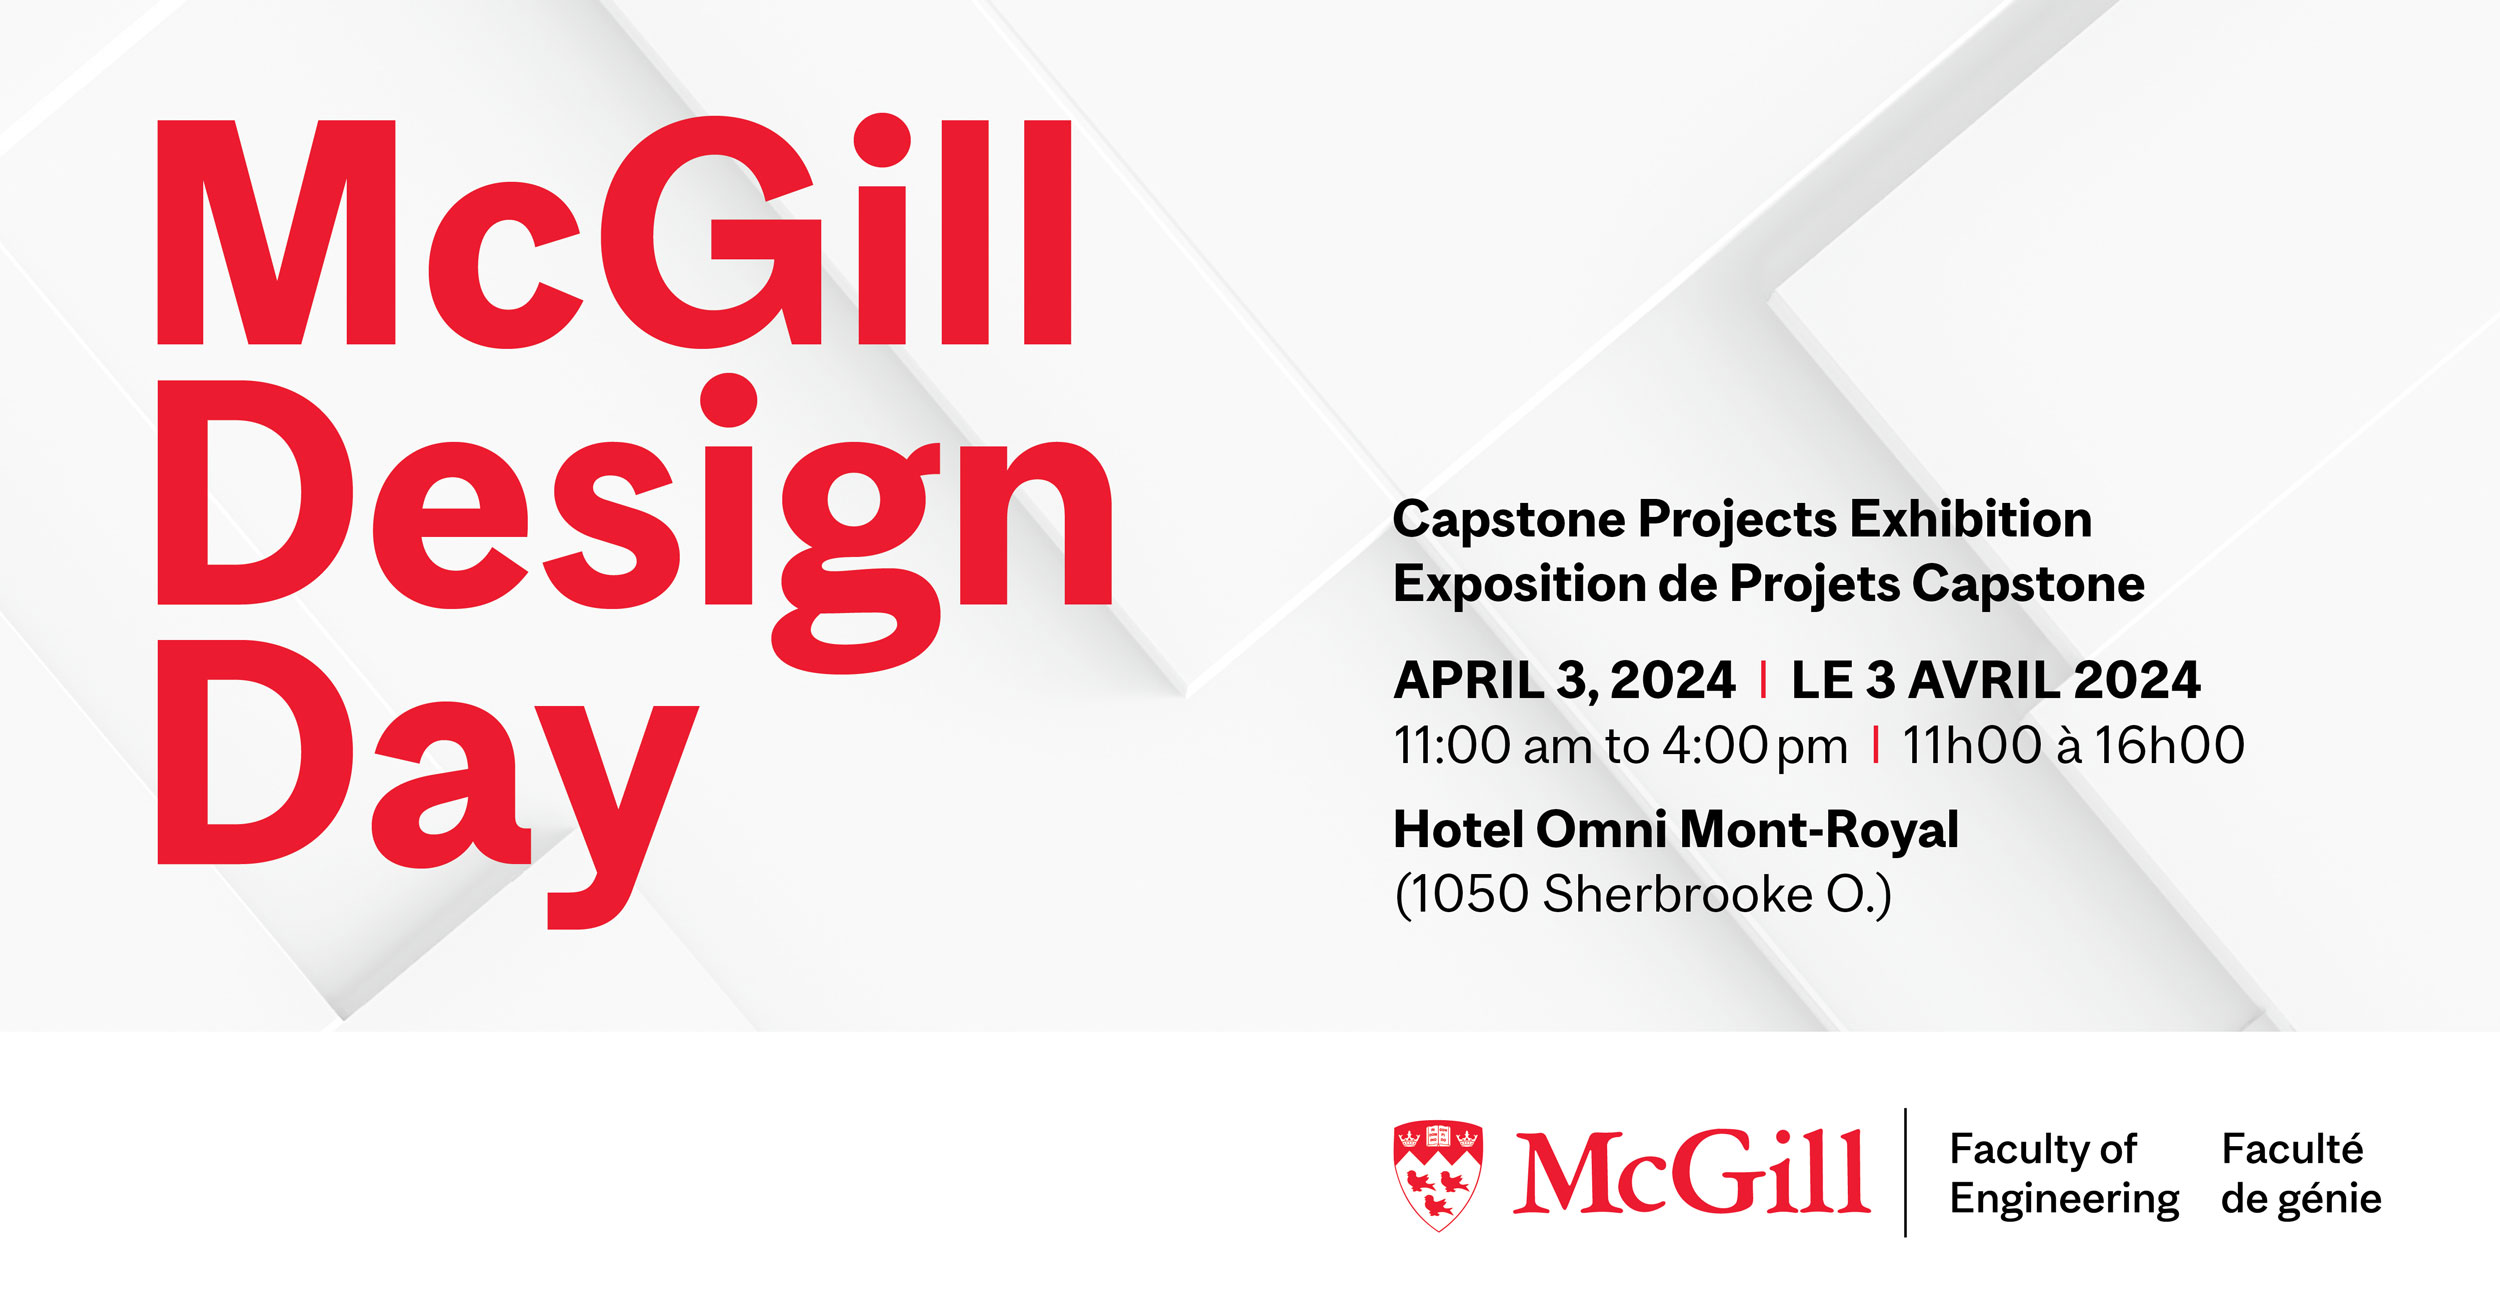 McGill Design Day, Faculty of Engineering’s Capstone Projects Exhibition, is happening on April 3, 2024, from 11 am to 4:30 pm at Hotel Omni Mont-Royal (1050 Sherbrooke O.)